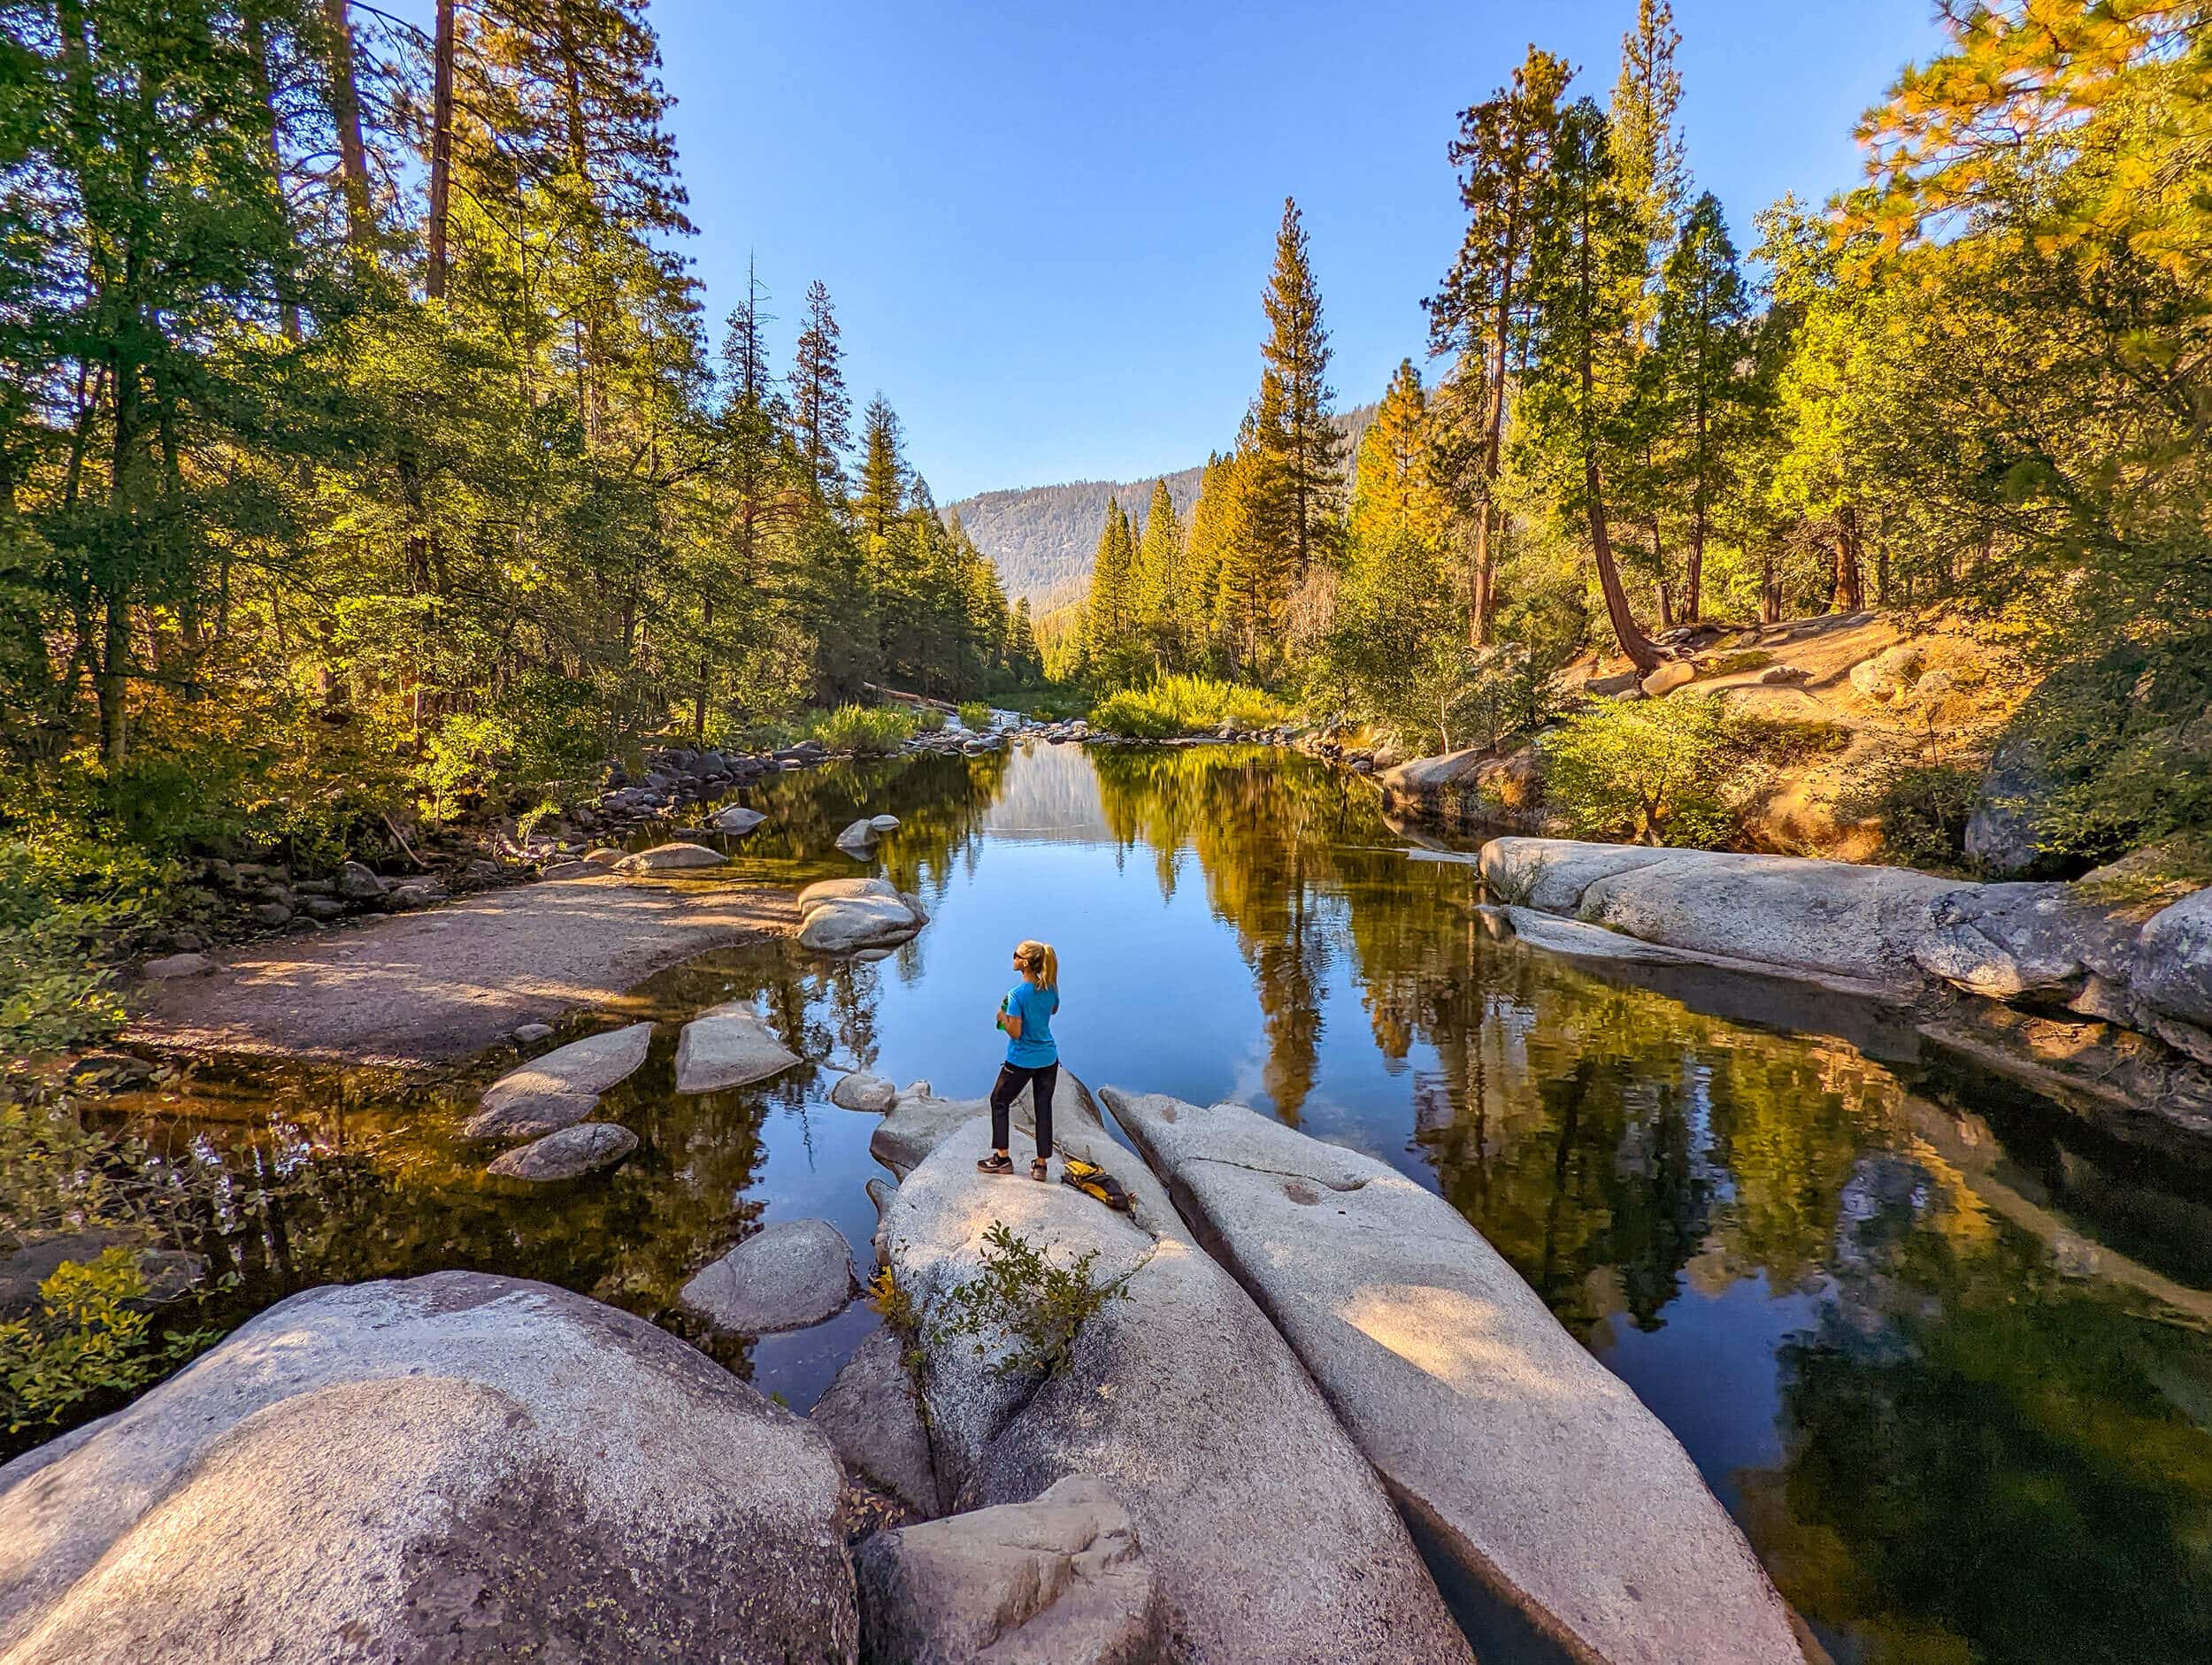 A woman admires the river in Wawona